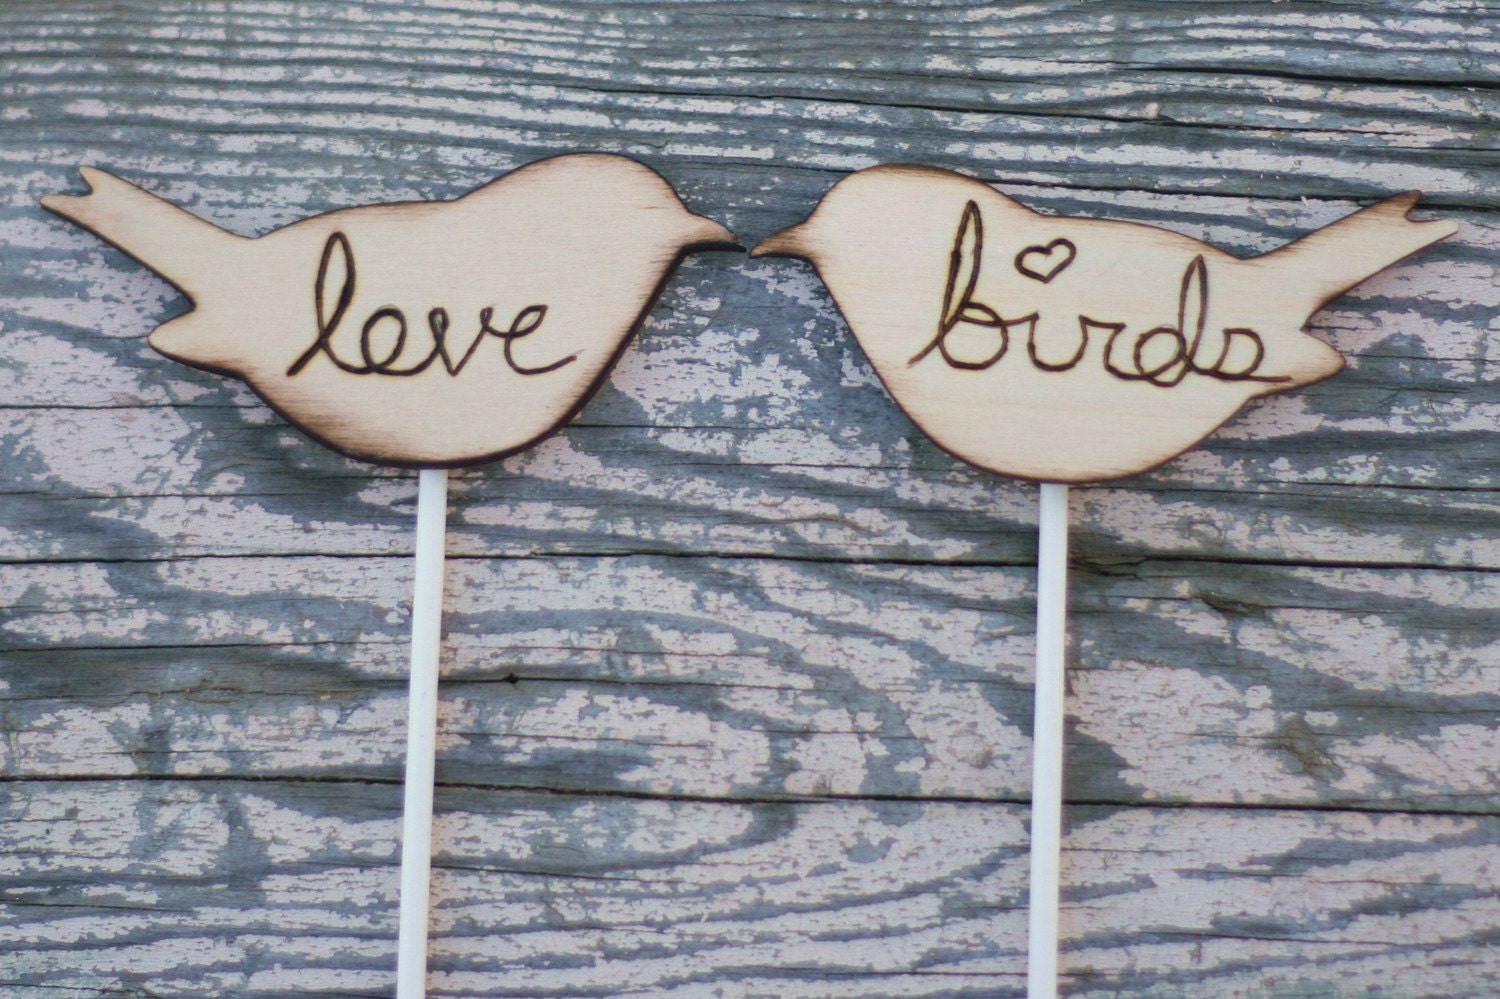 Love Birds Cupcake Cake Toppers Rustic Woodland Fall Winter Autumn Wedding Country Lake Cottage CHIC